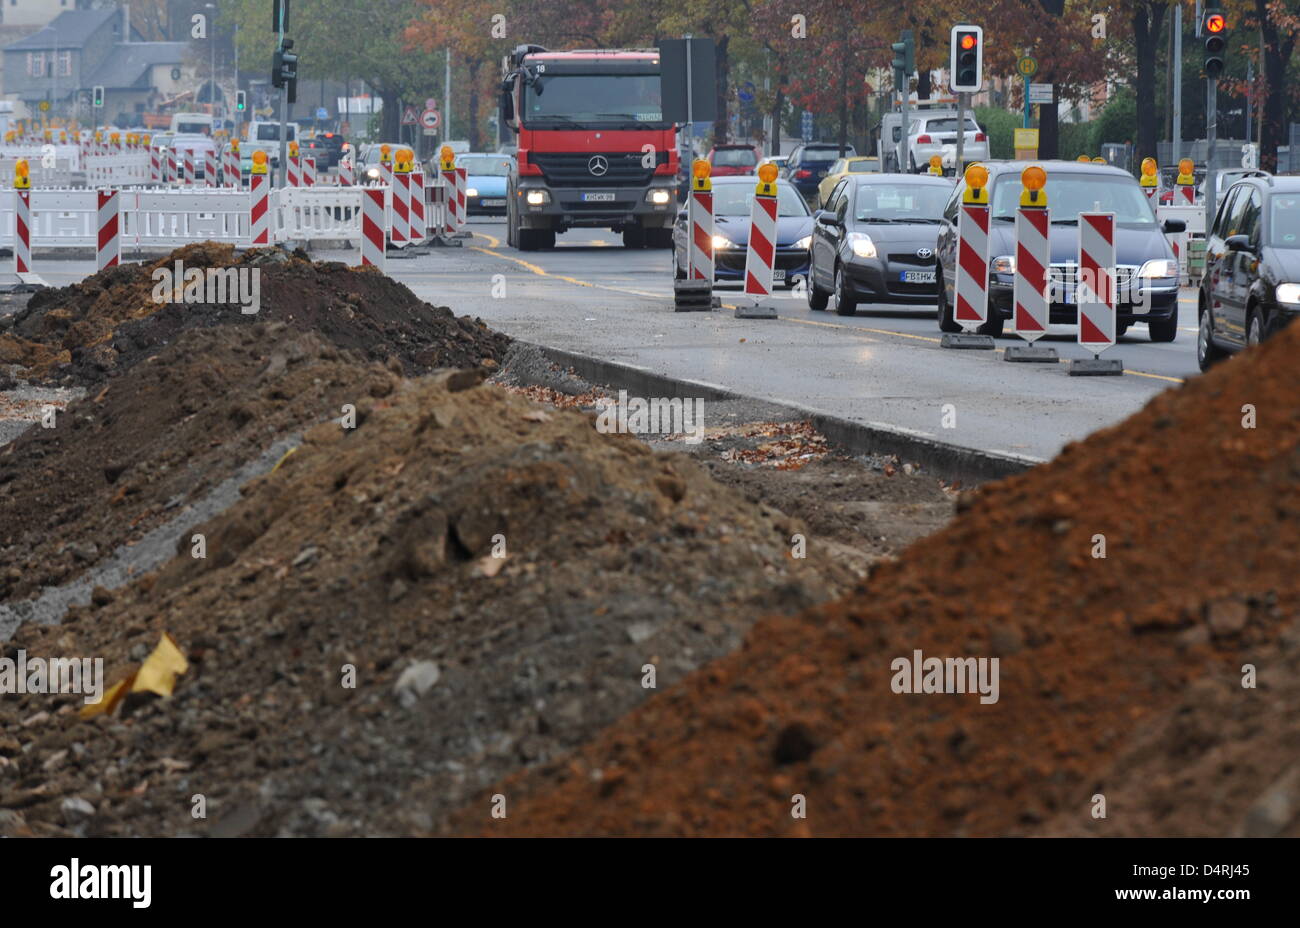 The picture shows the constriction site of the Tram 18 in Frankfurt Main, Germany, 22 October 2009. The new tram will have nine stops on a 3.5 km route and will be finished in 2011. Photo: Arne Dedert Stock Photo